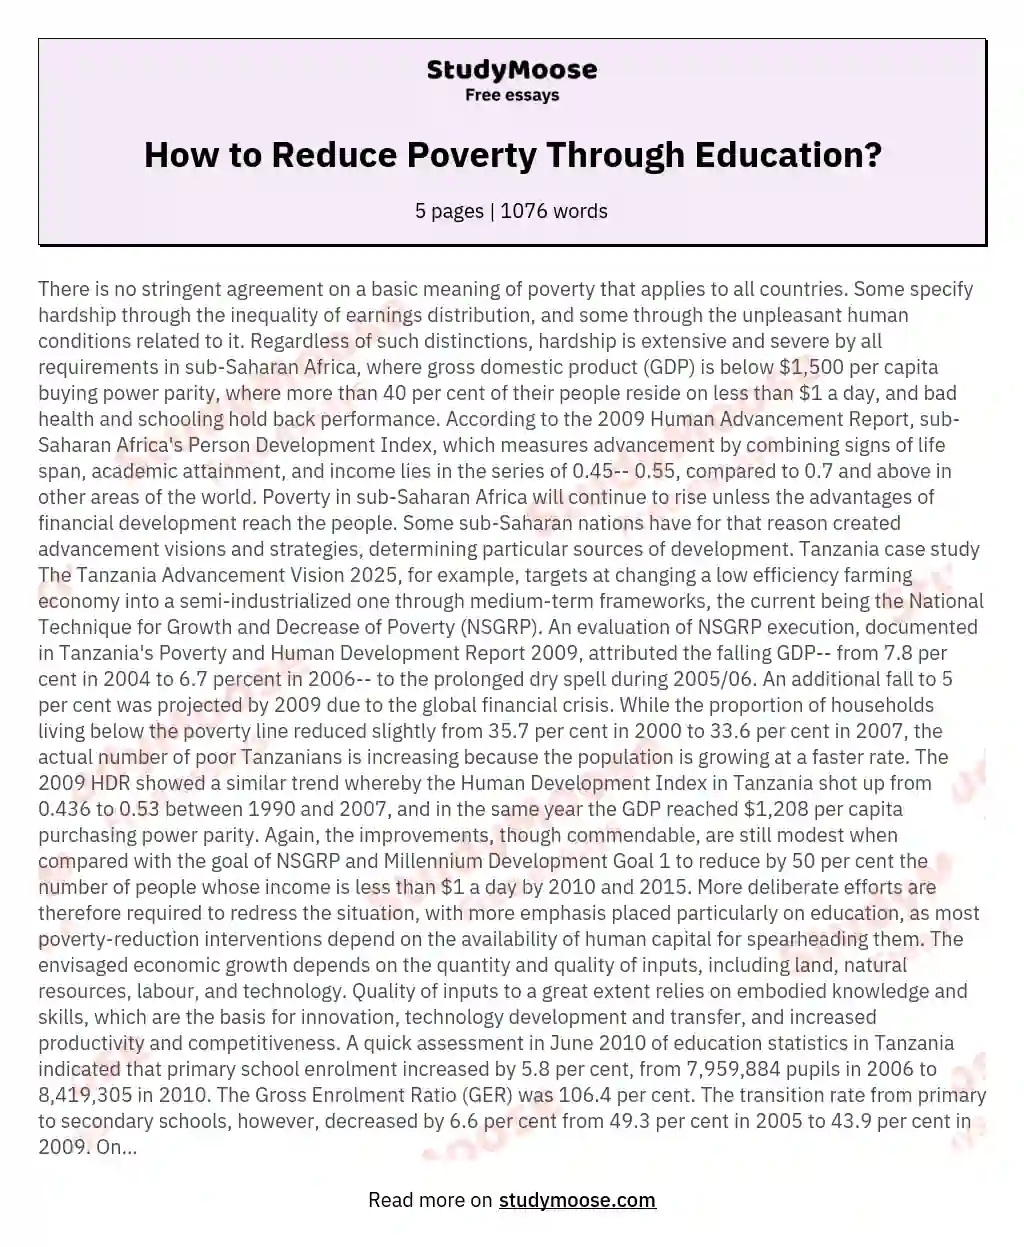 How to Reduce Poverty Through Education? essay